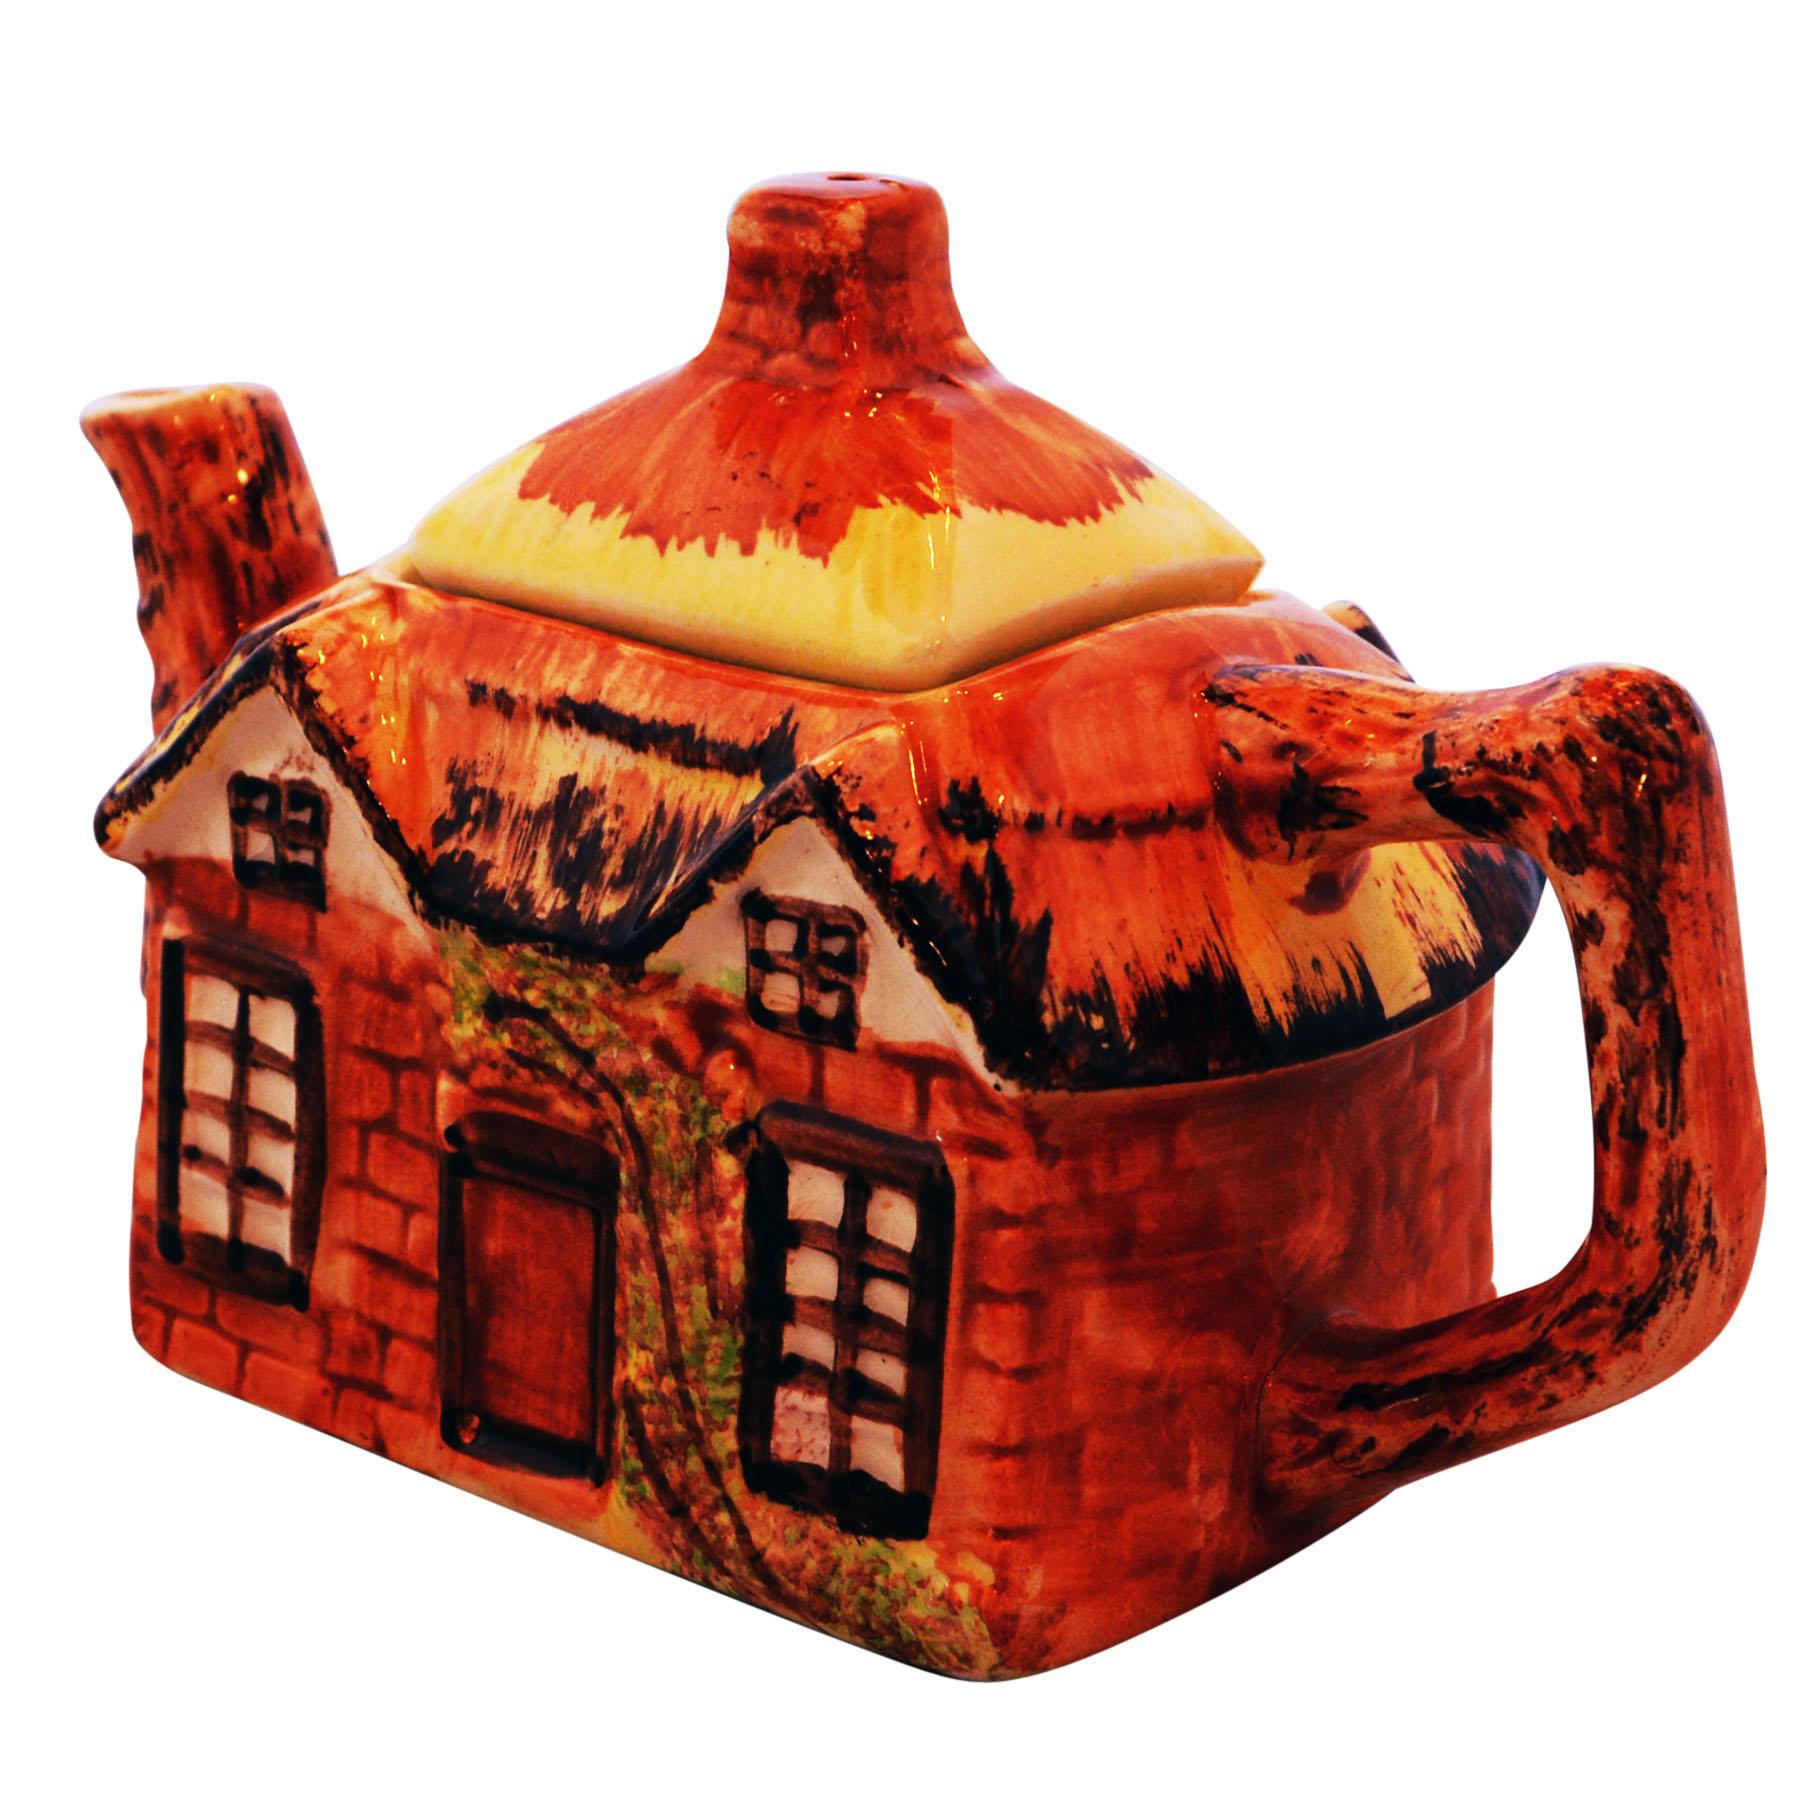 Lovely hand painted Kensington Cottageware teapot. Features thatched roof decorated on all four sides.